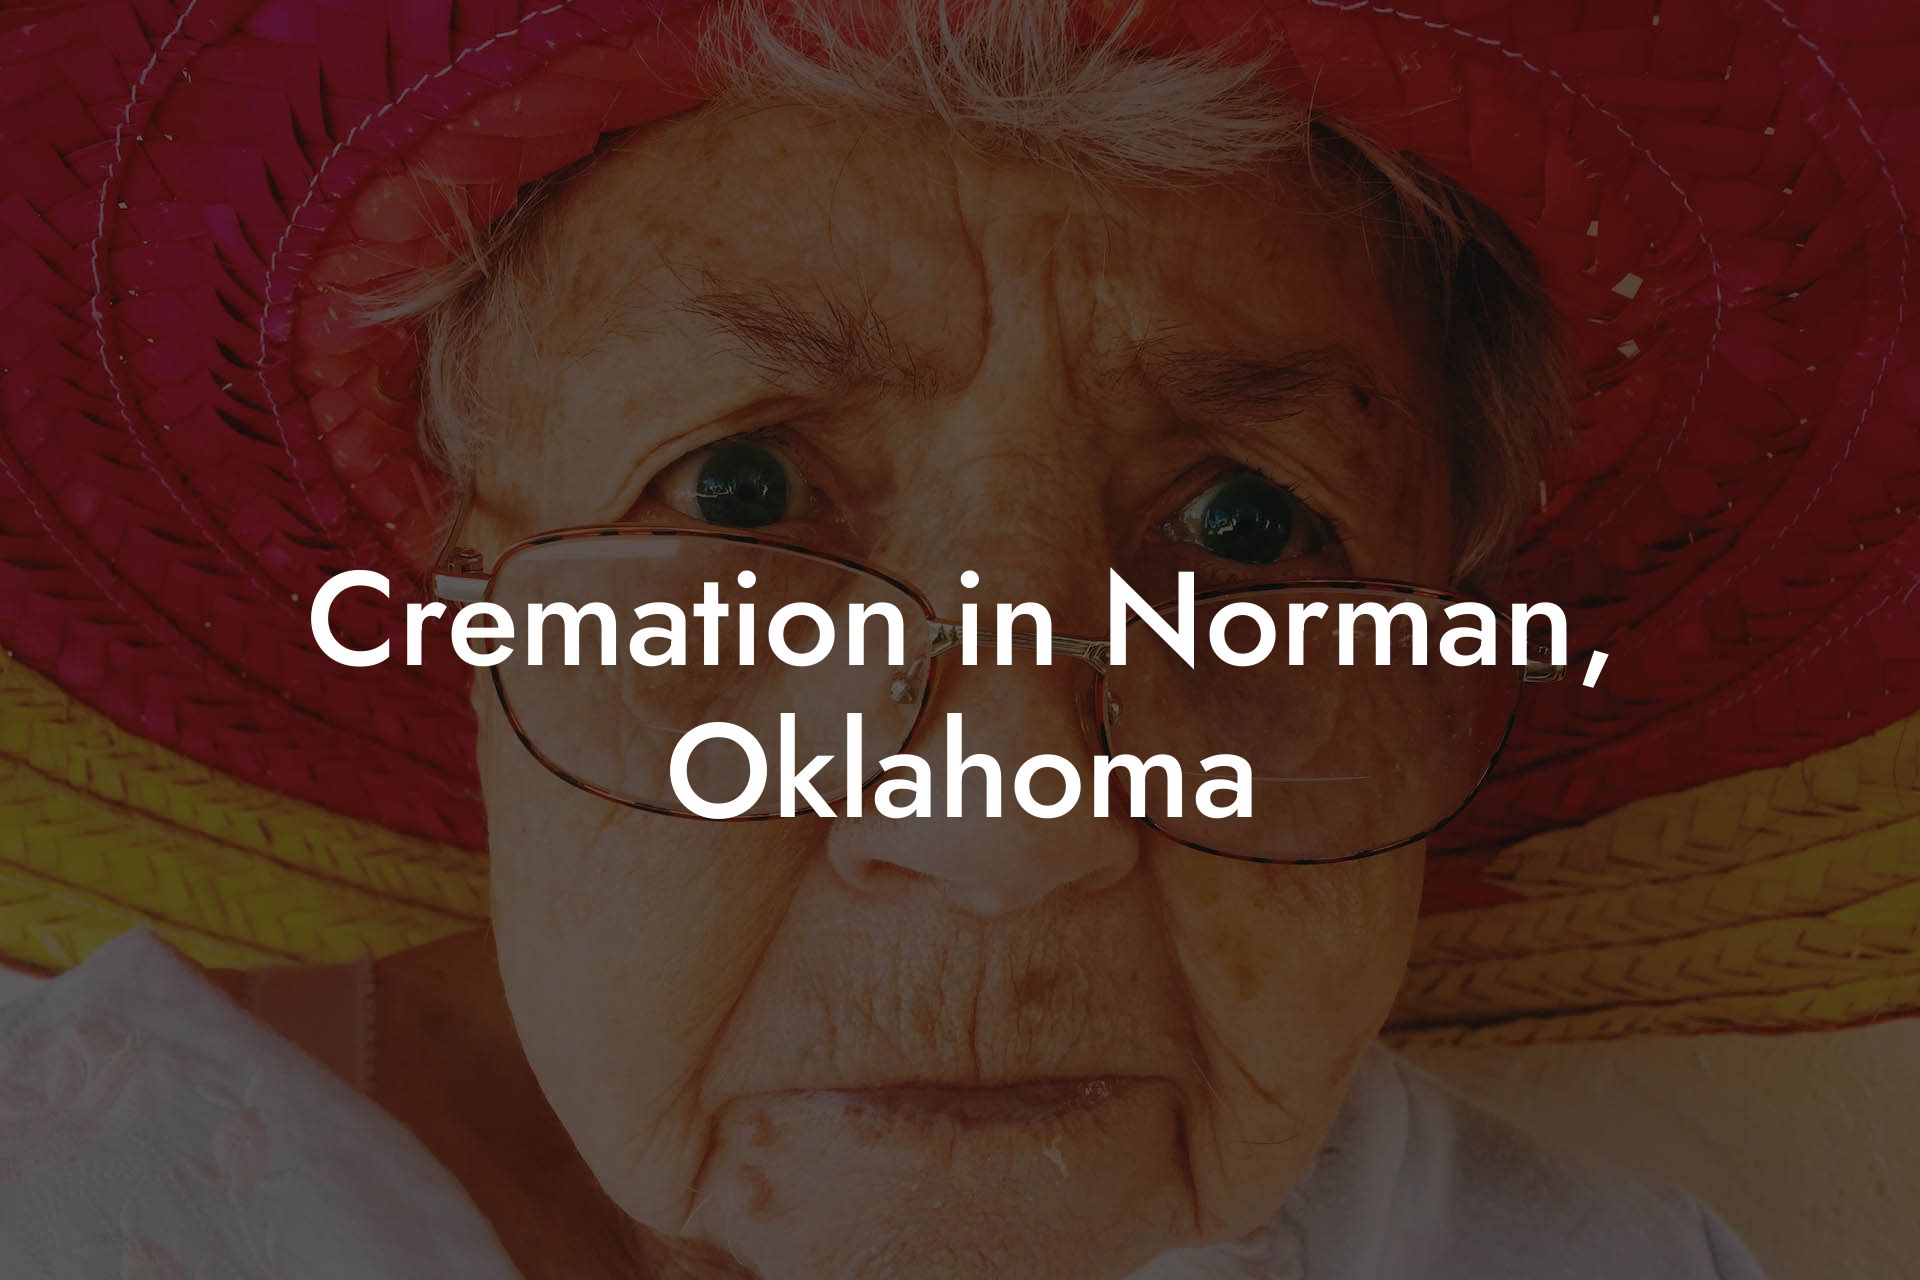 Cremation in Norman, Oklahoma